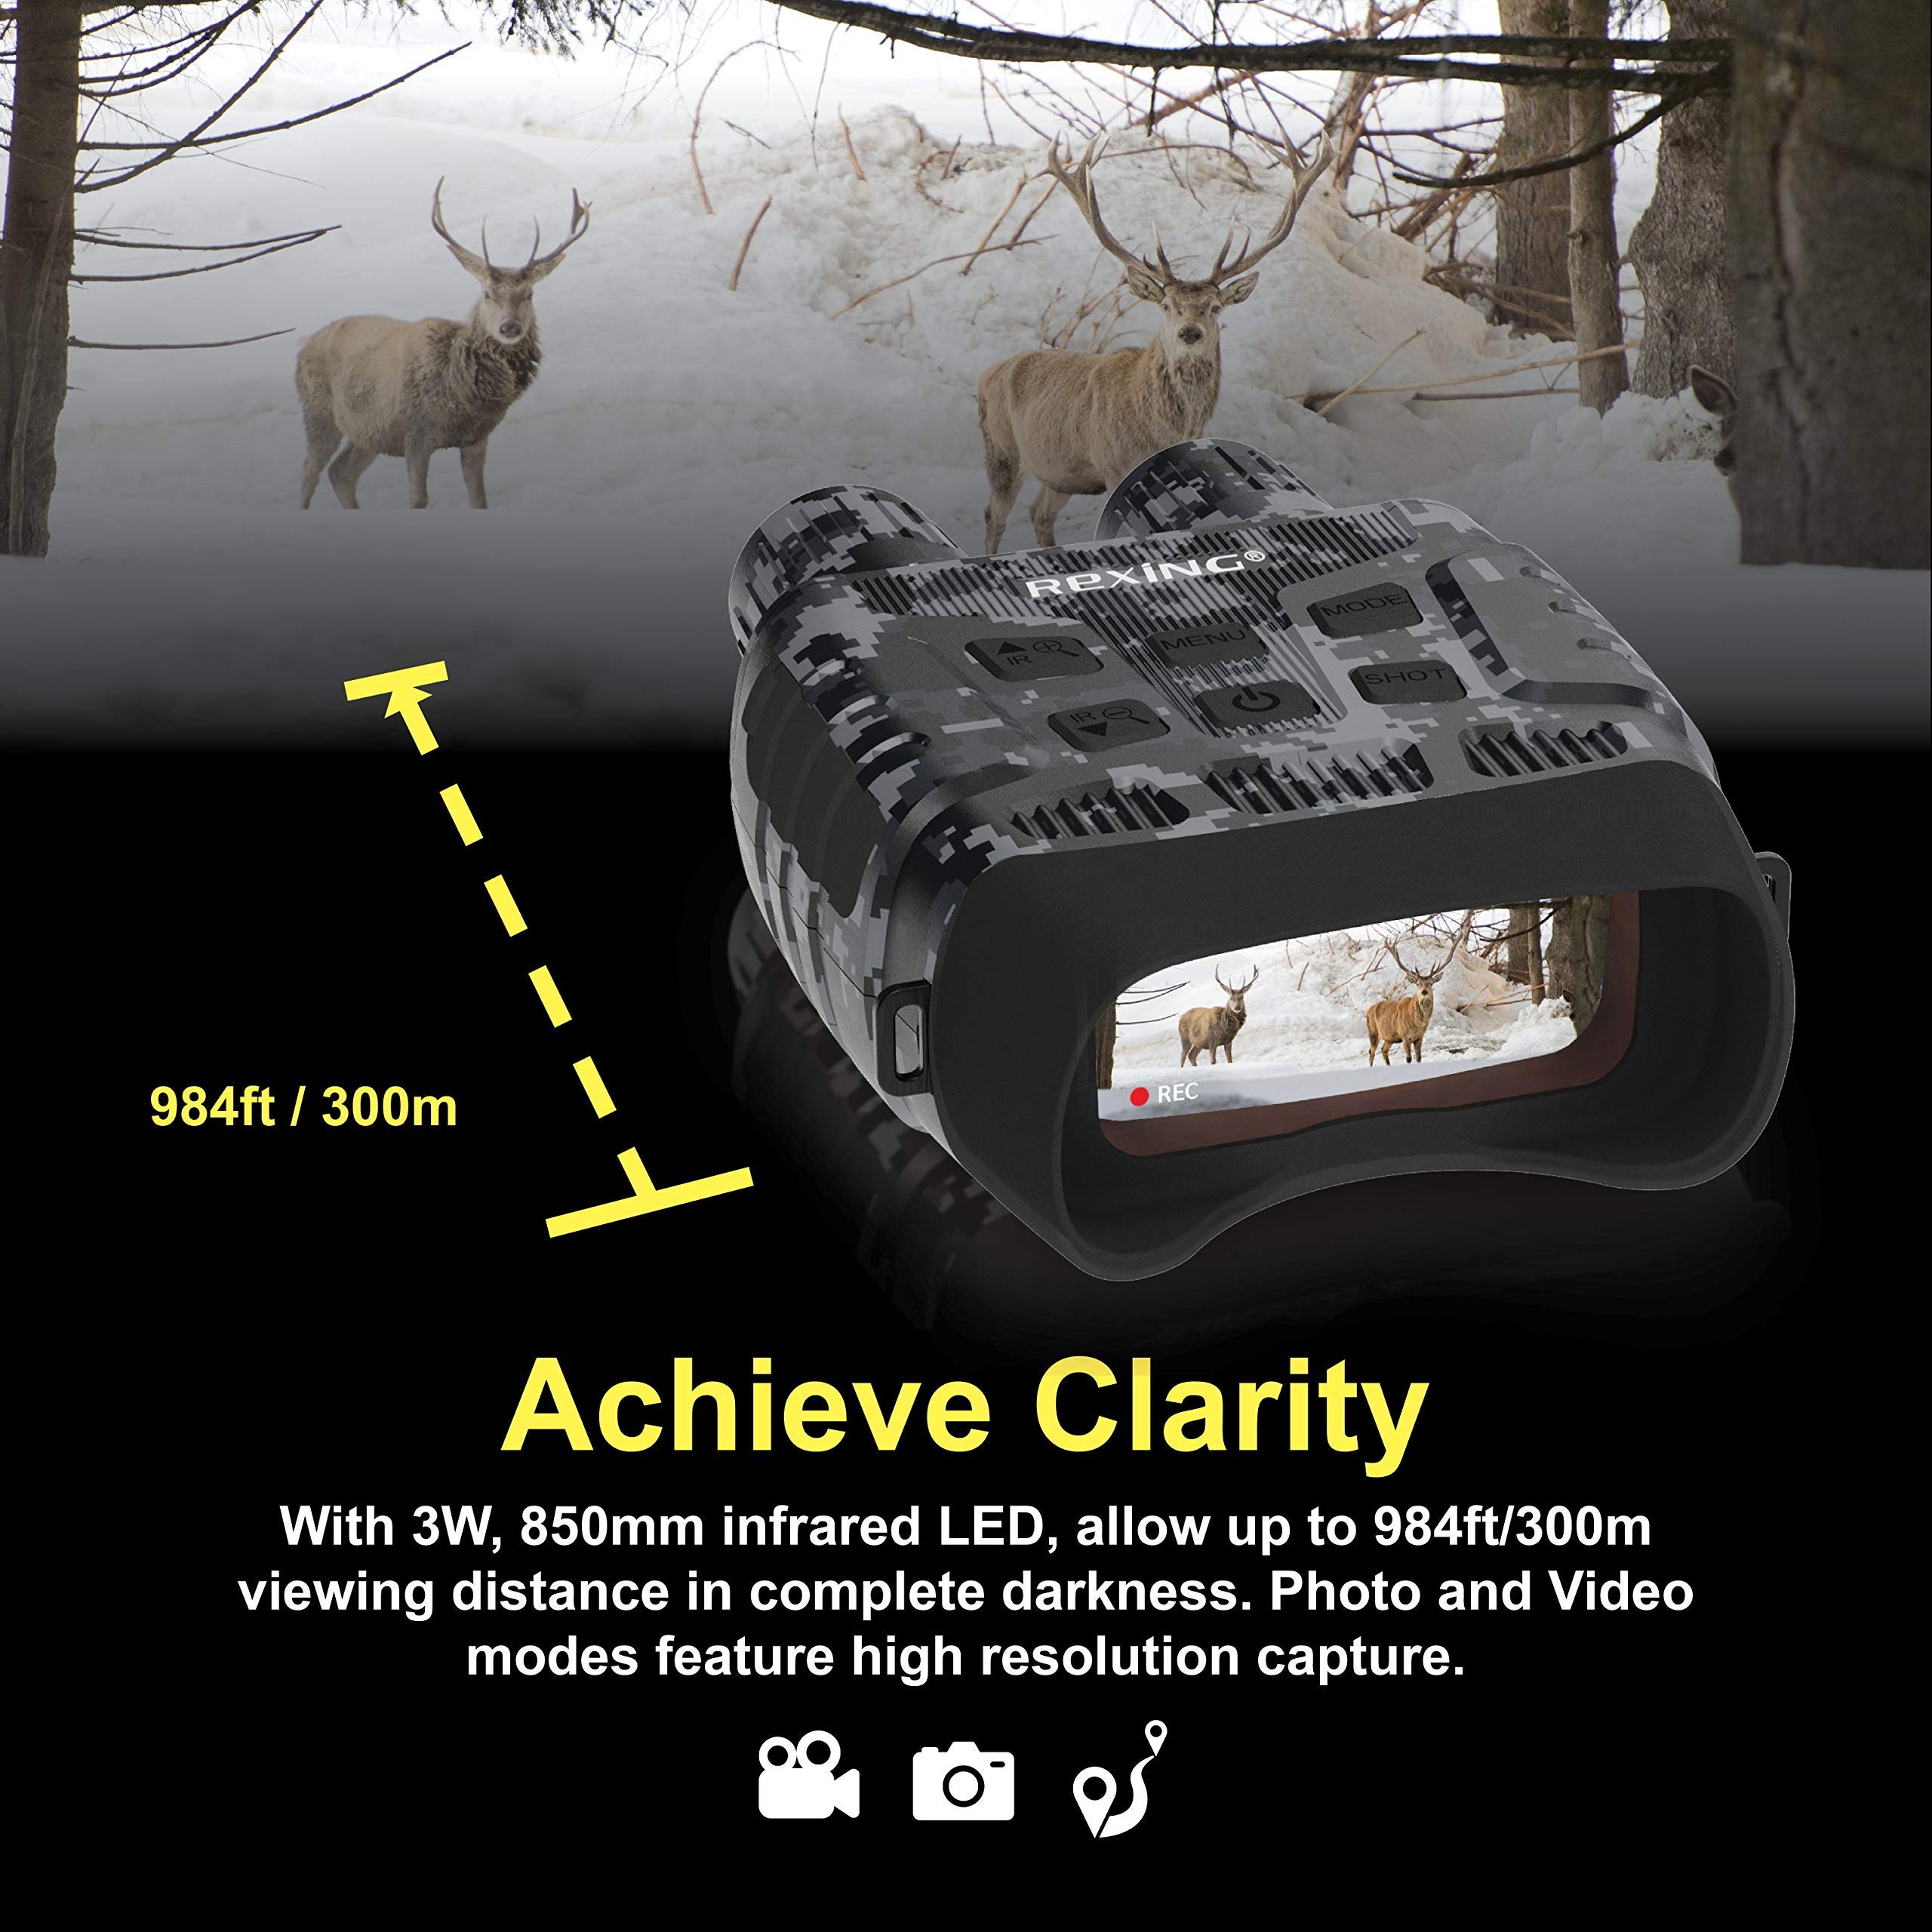 REXING B1 (Digital Camo) Night Vision Goggles Binoculars with LCD Screen,Infrared (IR) Digital Camera,Dual Photo + Video Recording for Spotting,Hunting,Tracking up to 300 Meters,Rexing-B1-DC